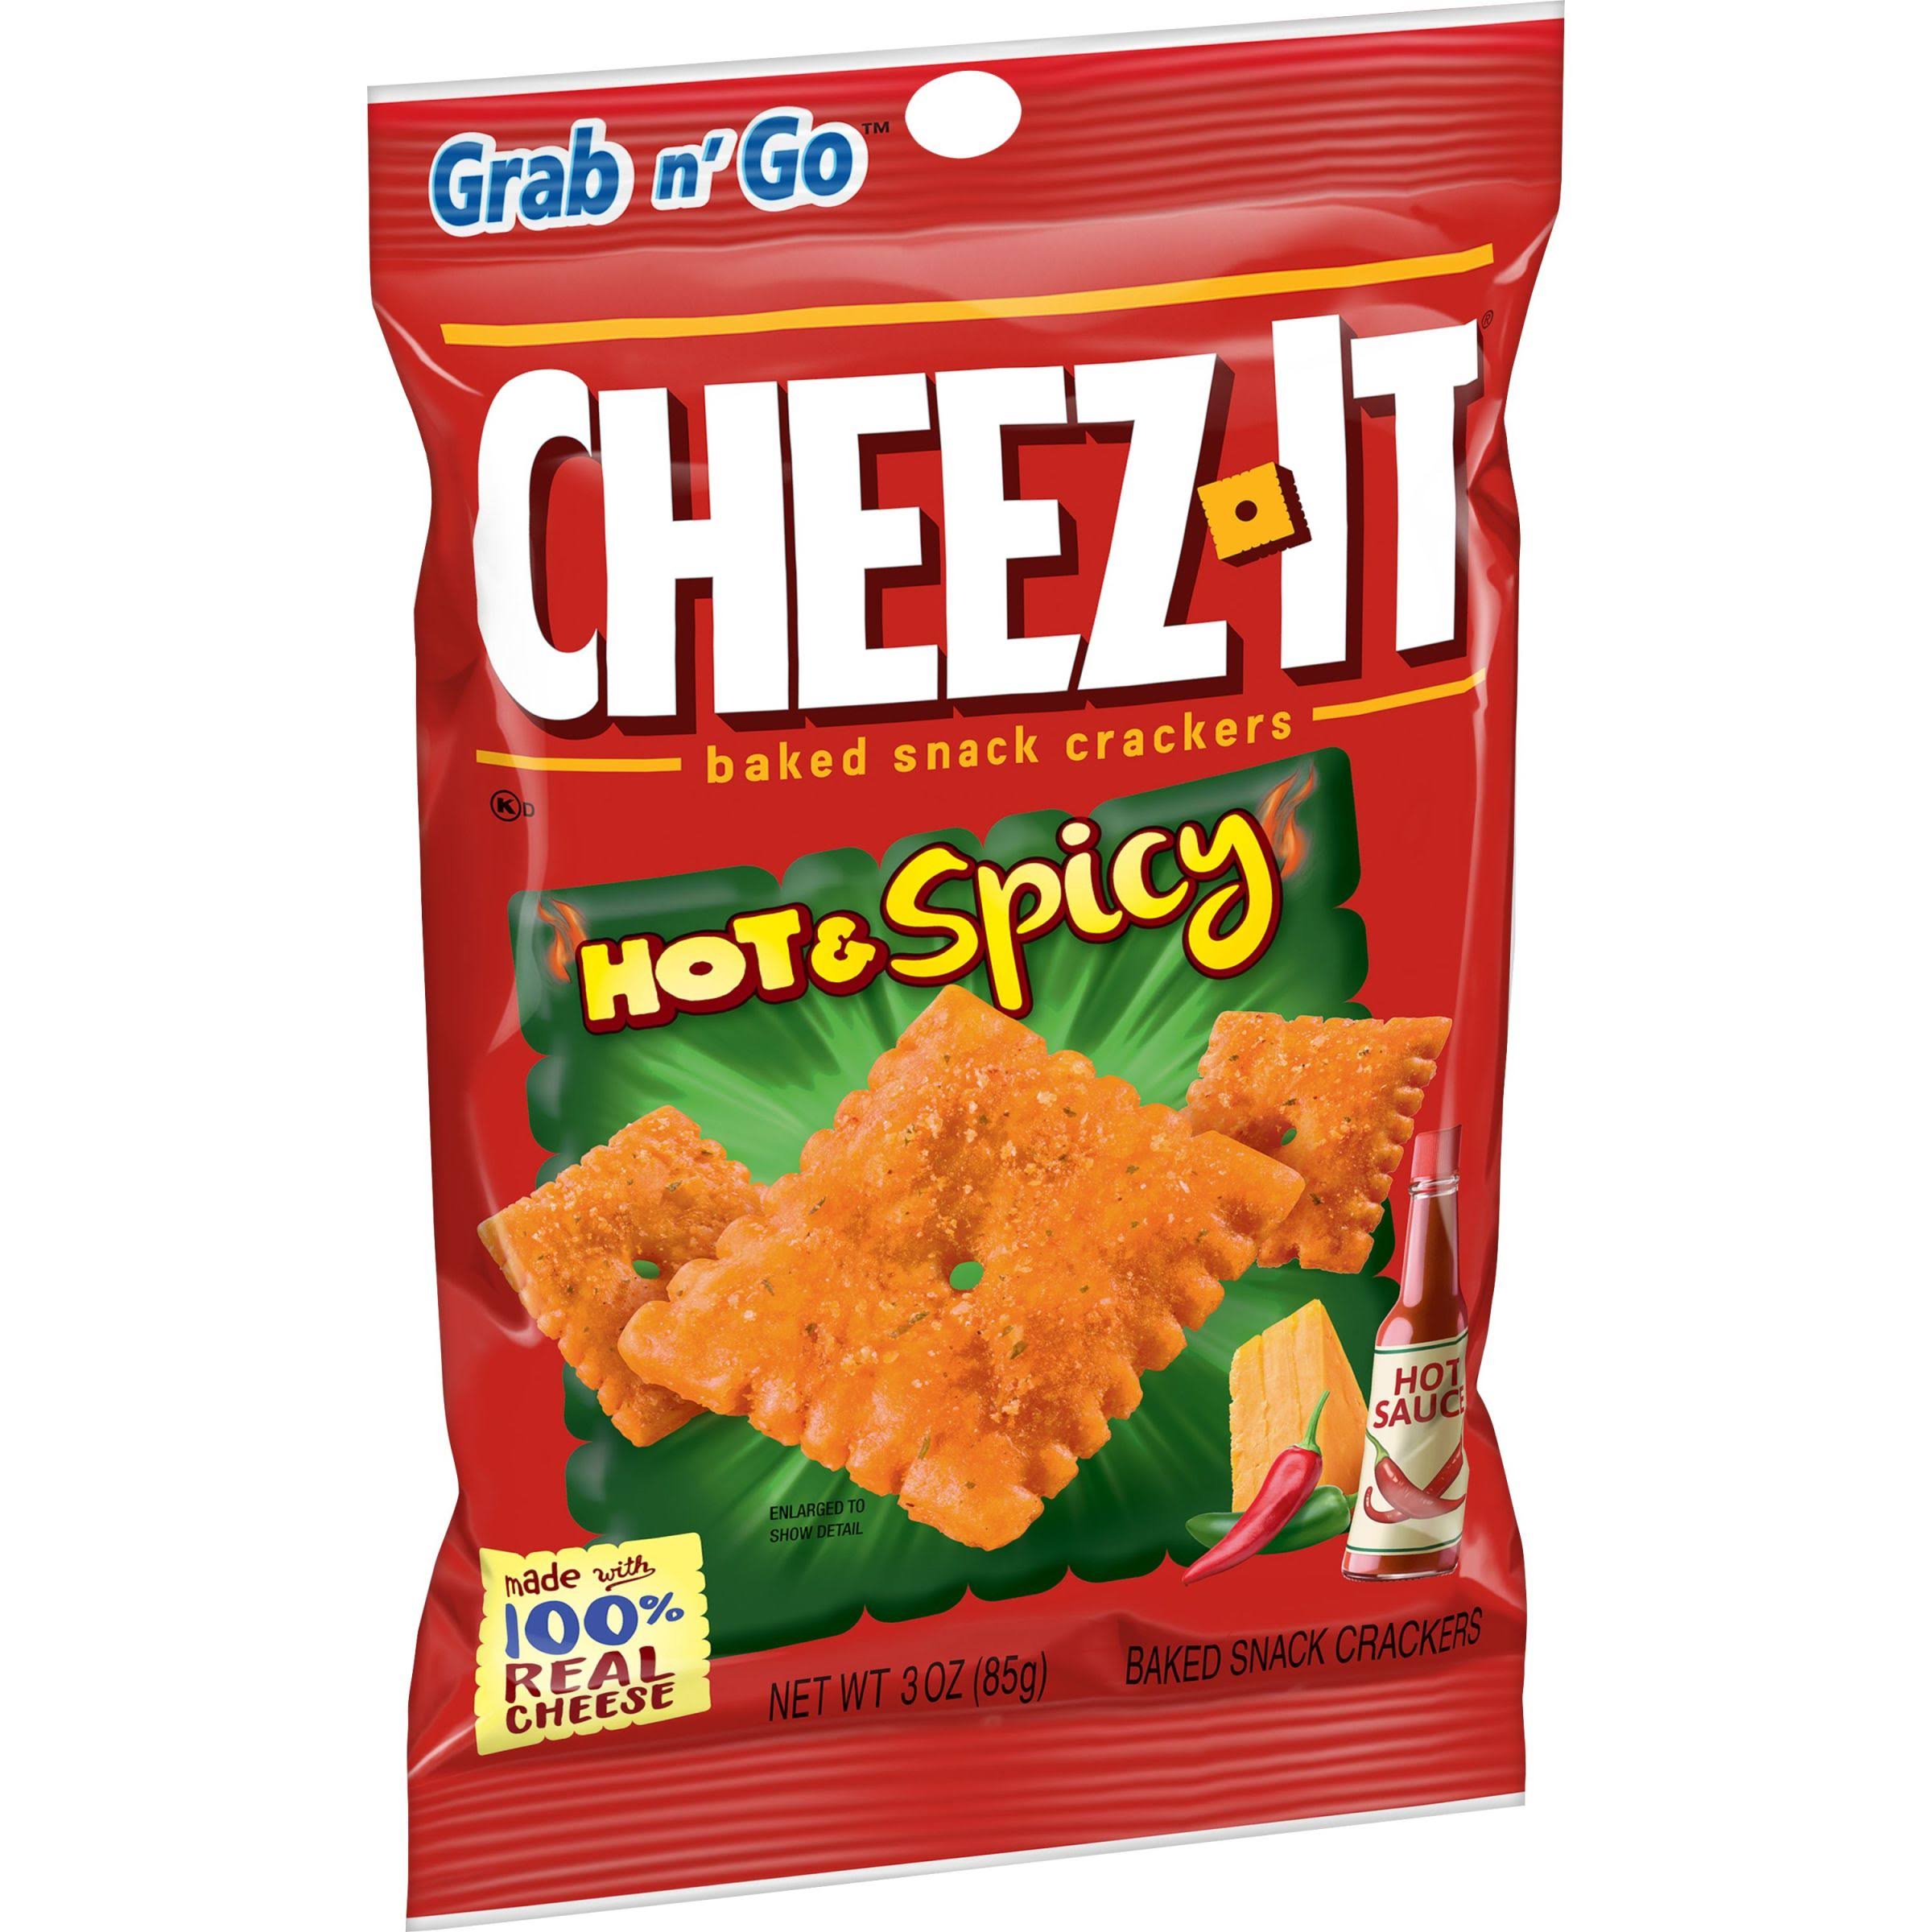 Cheez-It Grab n’ Go Baked Snack Crackers, Hot & Spicy - 3 oz